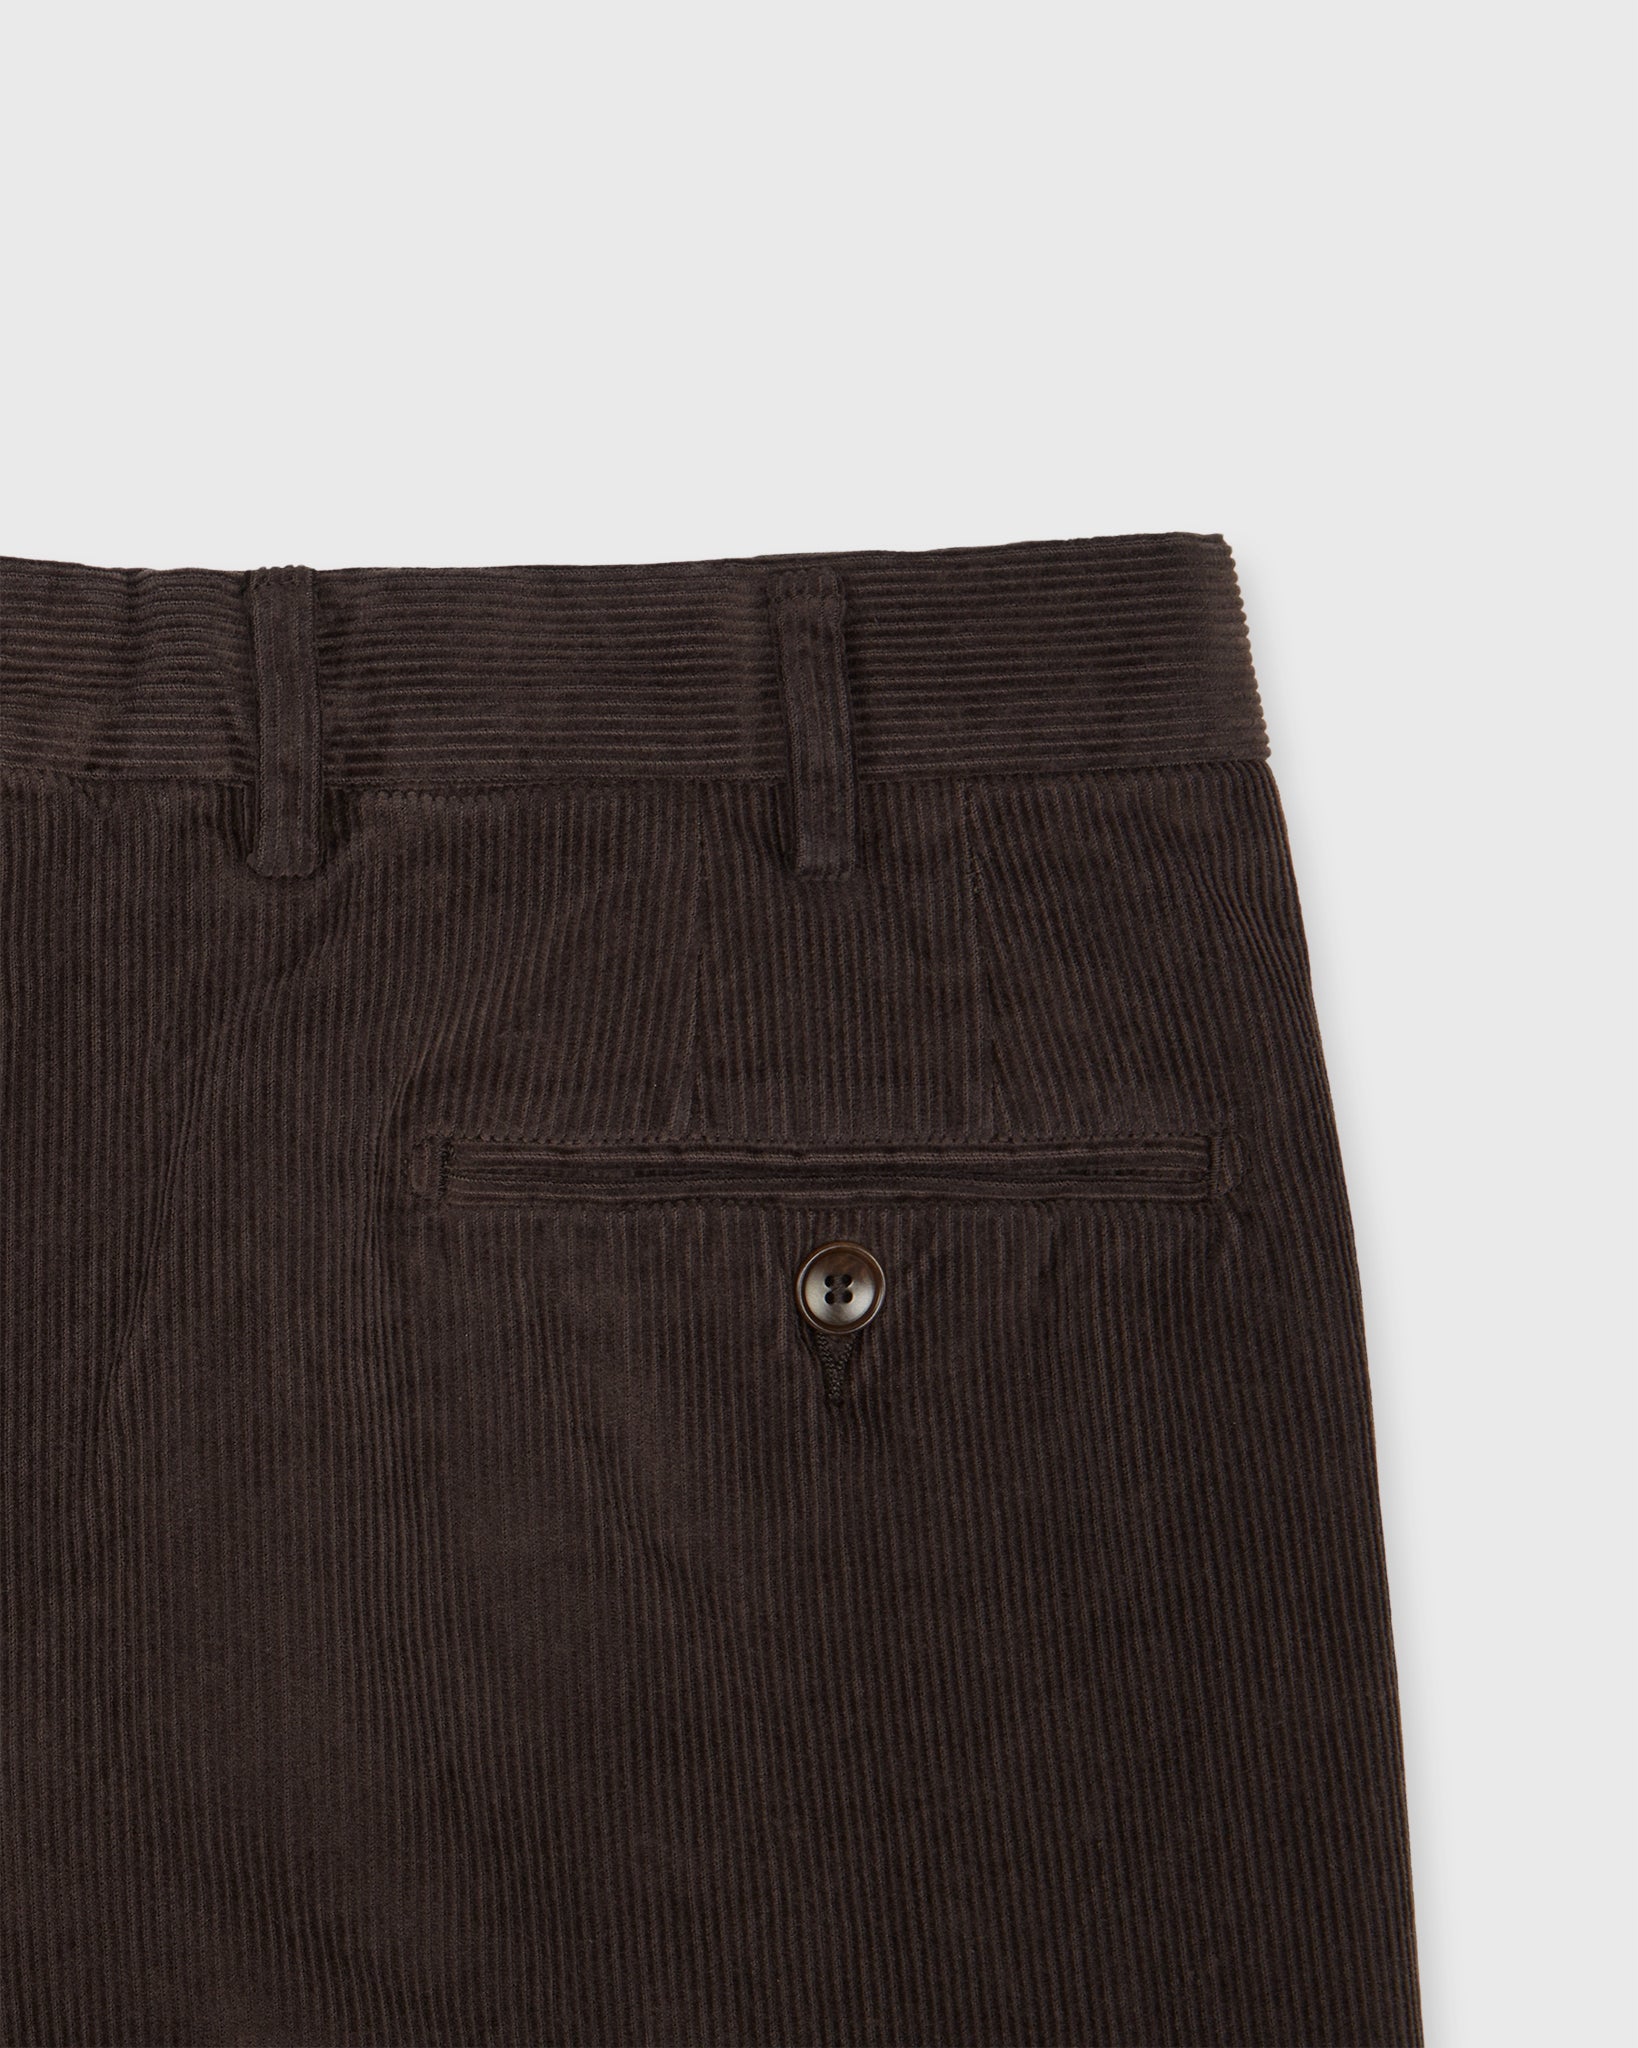 Garment-Dyed Sport Trouser in Chocolate Corduroy